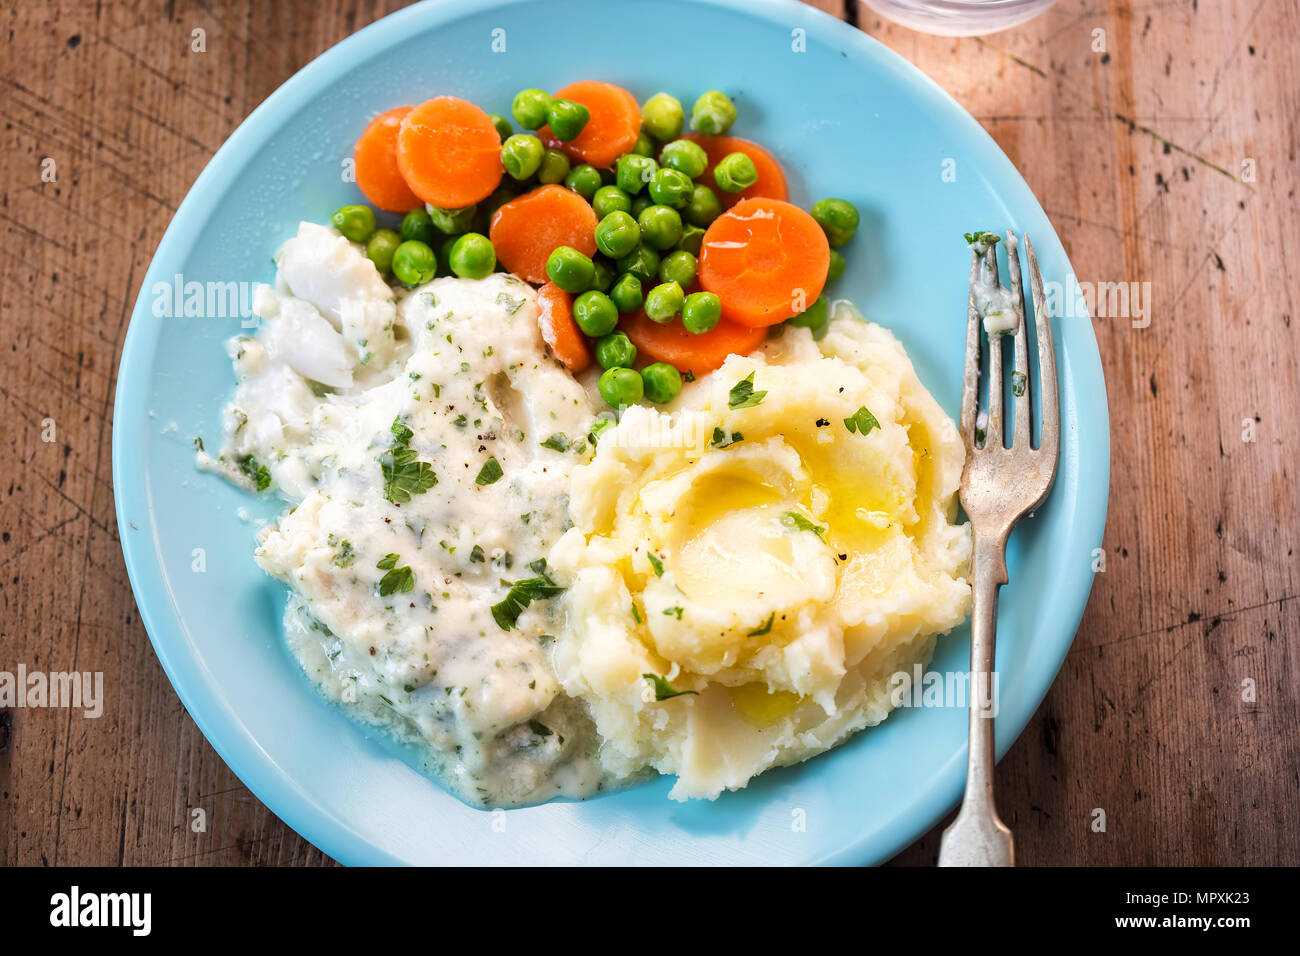 Cod fillet in parsley sauce with mash, peas and carrots Stock Photo - Alamy